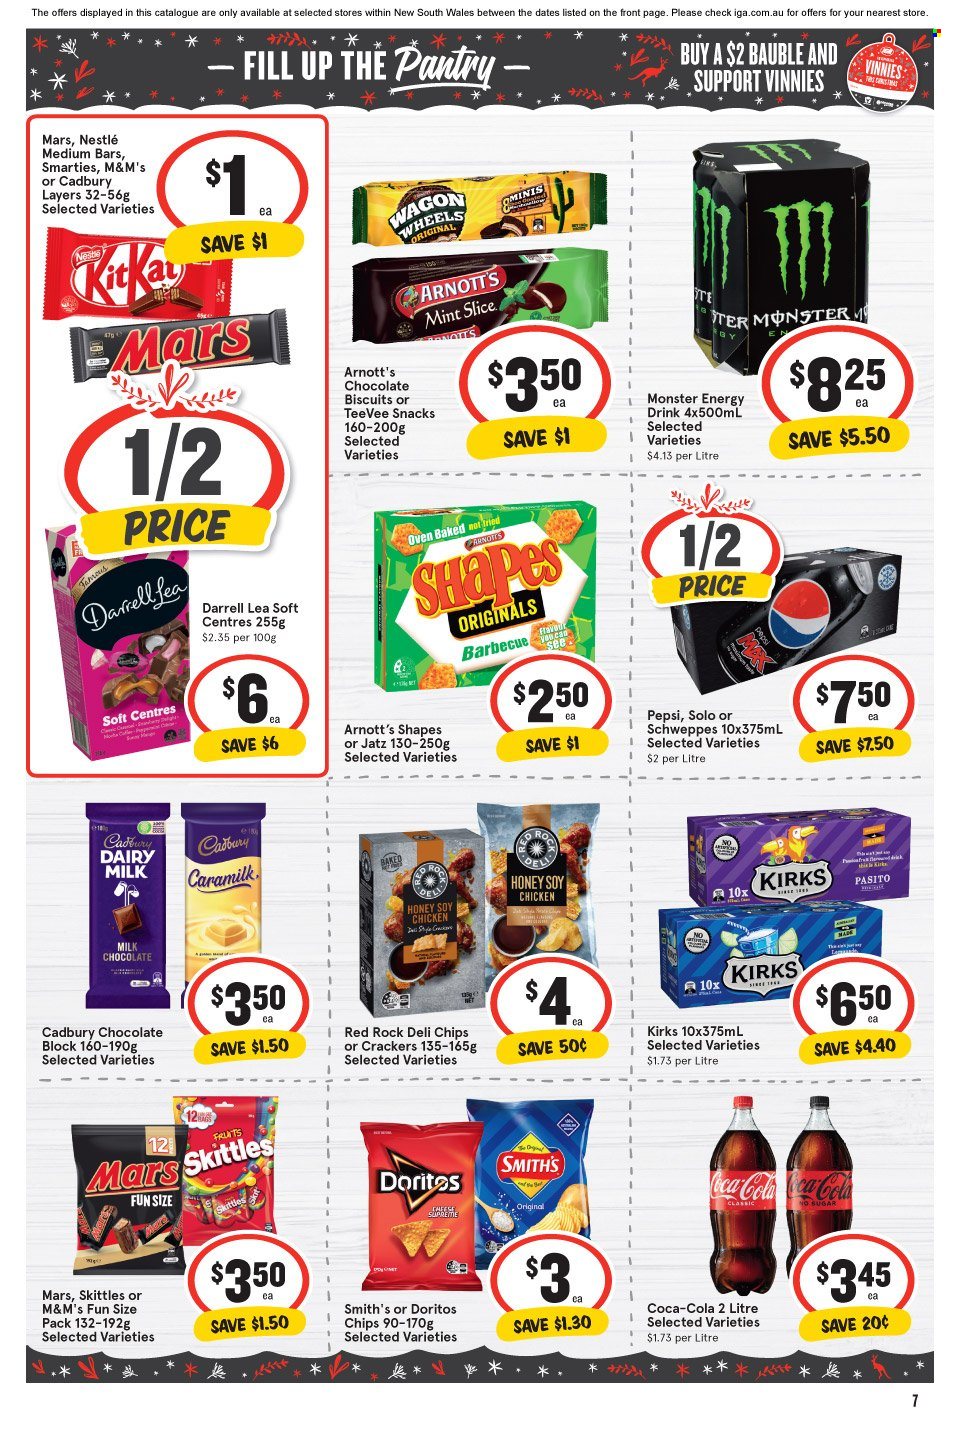 thumbnail - IGA Catalogue - 30 Nov 2022 - 6 Dec 2022 - Sales products - cheese, milk chocolate, Nestlé, chocolate, snack, Mars, M&M's, Smarties, crackers, biscuit, Cadbury, Dairy Milk, Skittles, Doritos, chips, Smith's, honey, Coca-Cola, Schweppes, Pepsi, energy drink, Monster, Monster Energy, bauble. Page 7.